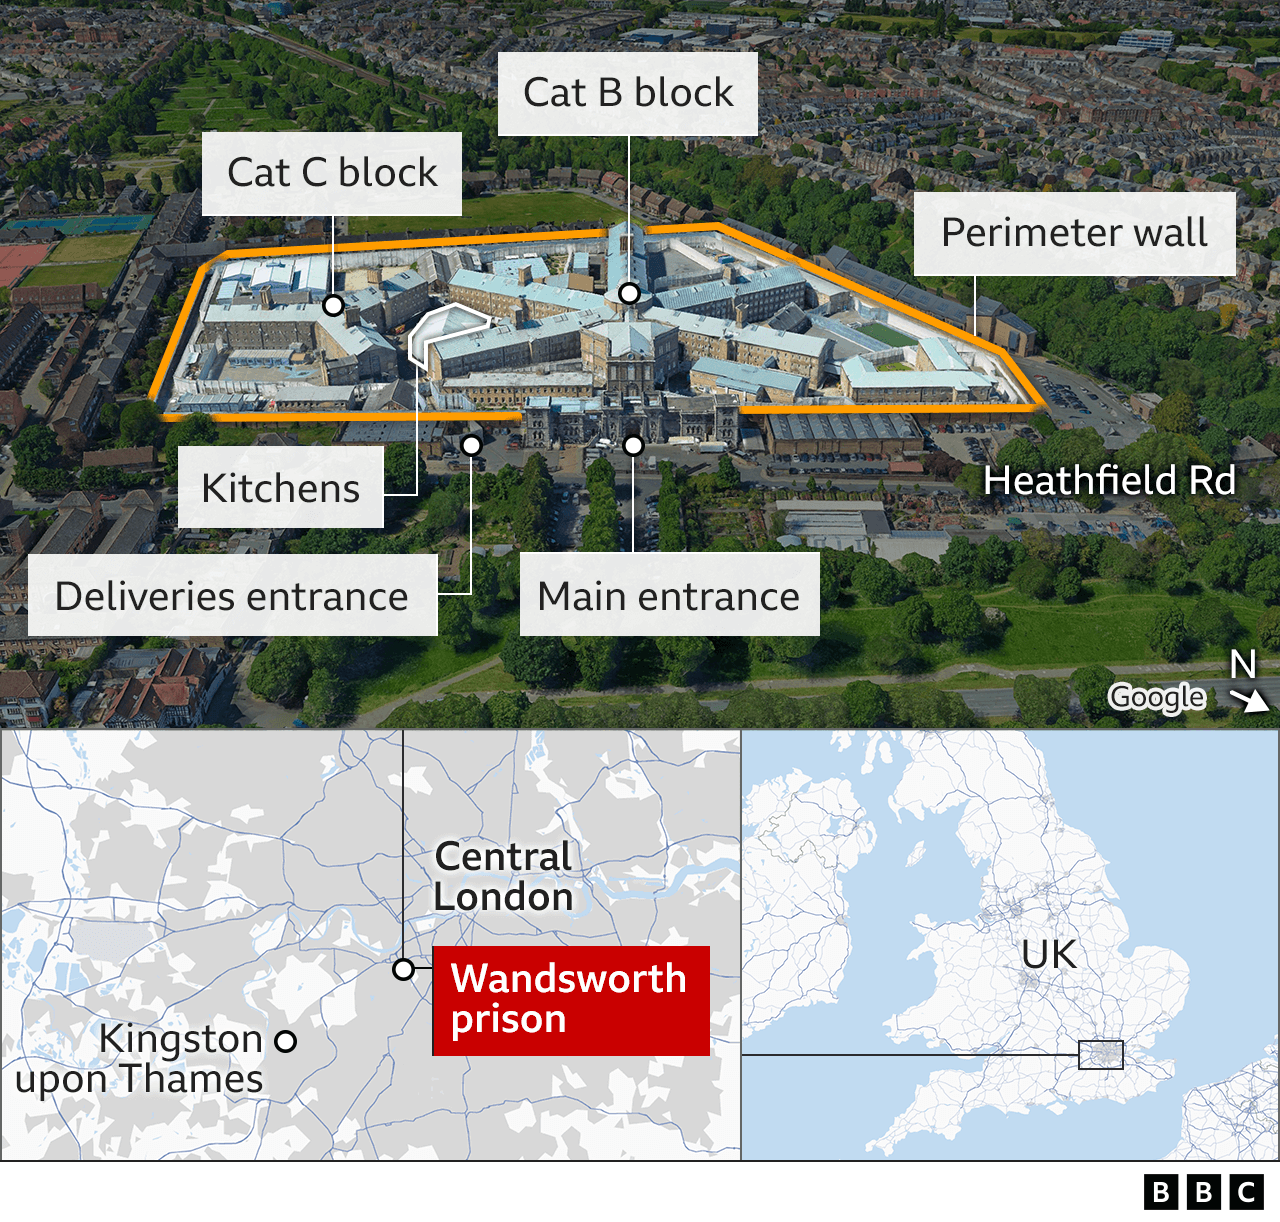 An aerial view of Wandsworth prison